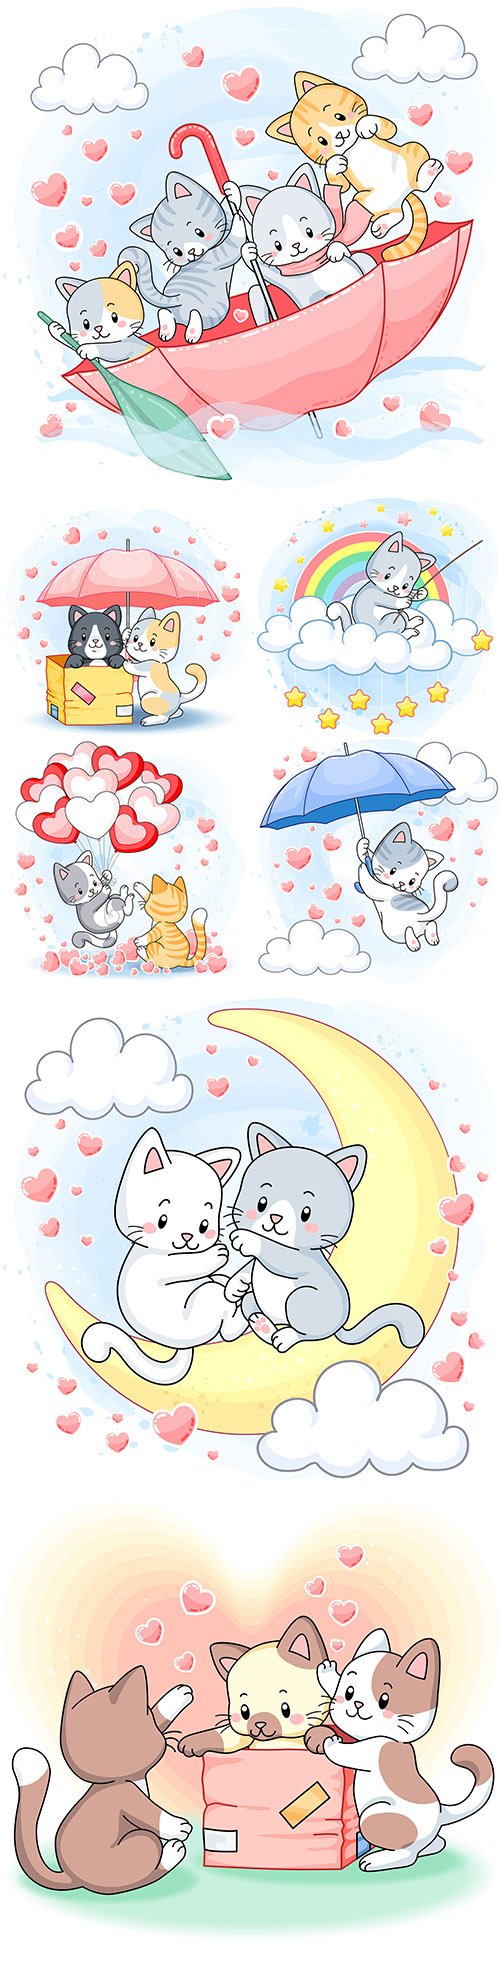 Nice funny kittens with umbrella and hearts illustration